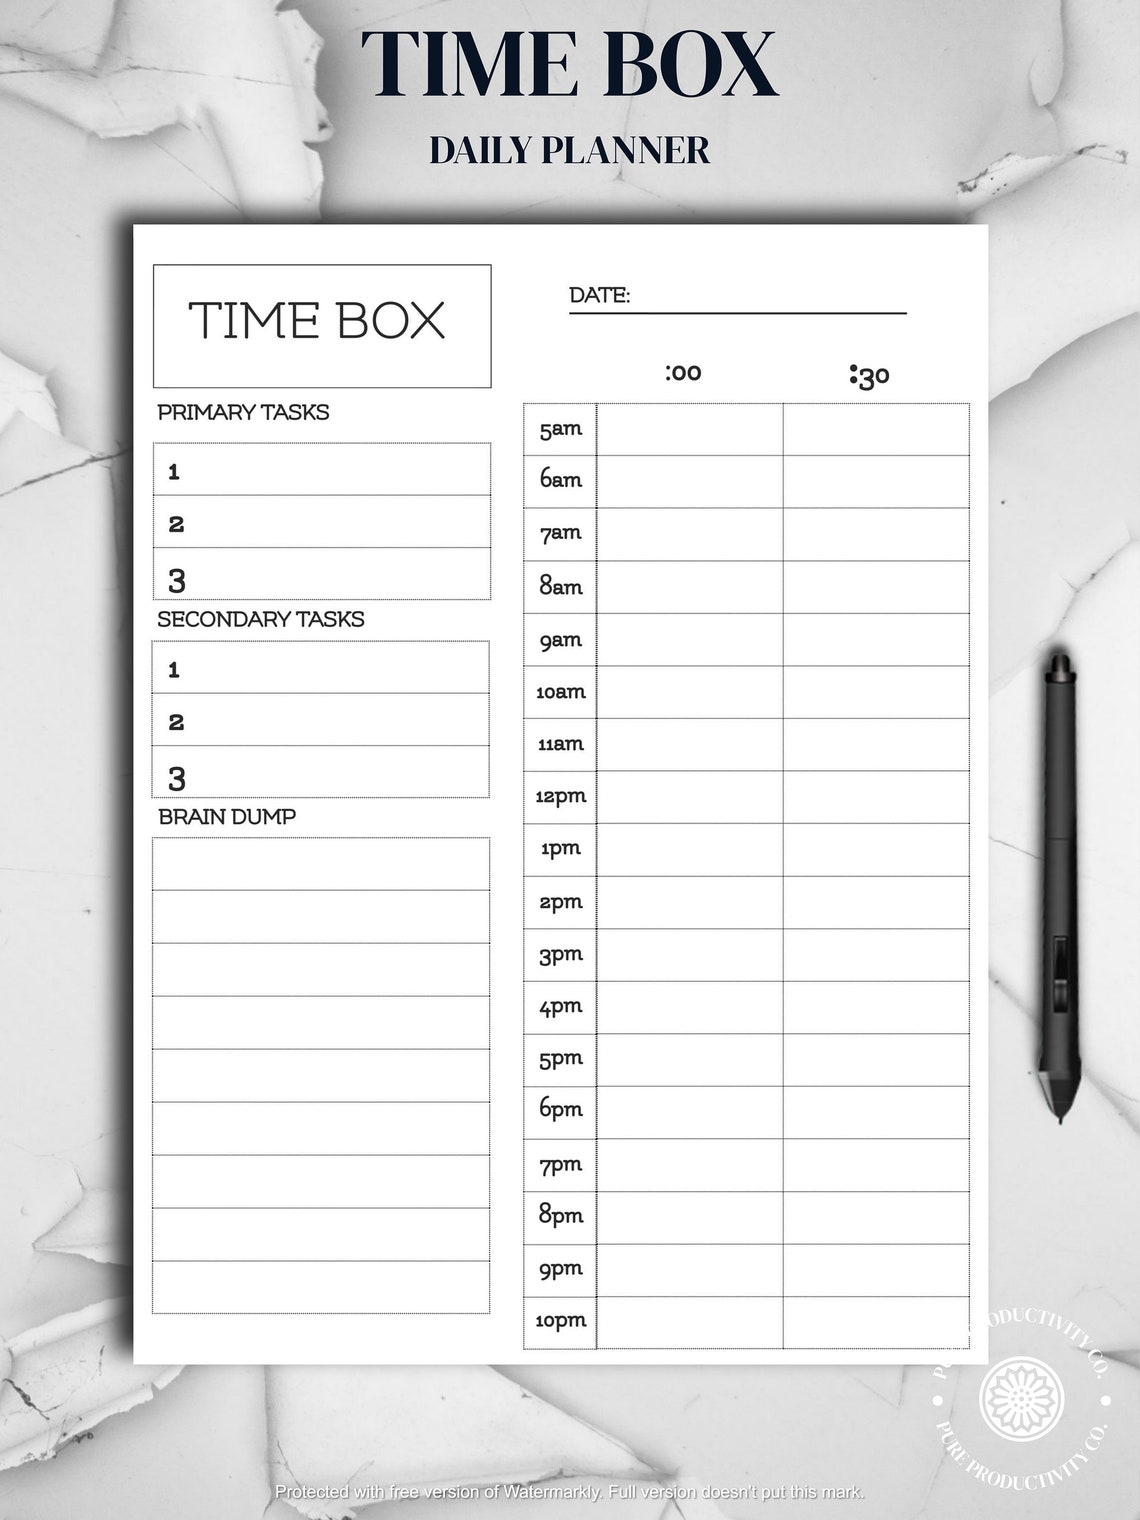 timebox-printable-planner-daily-weekly-bundle-time-box-planner